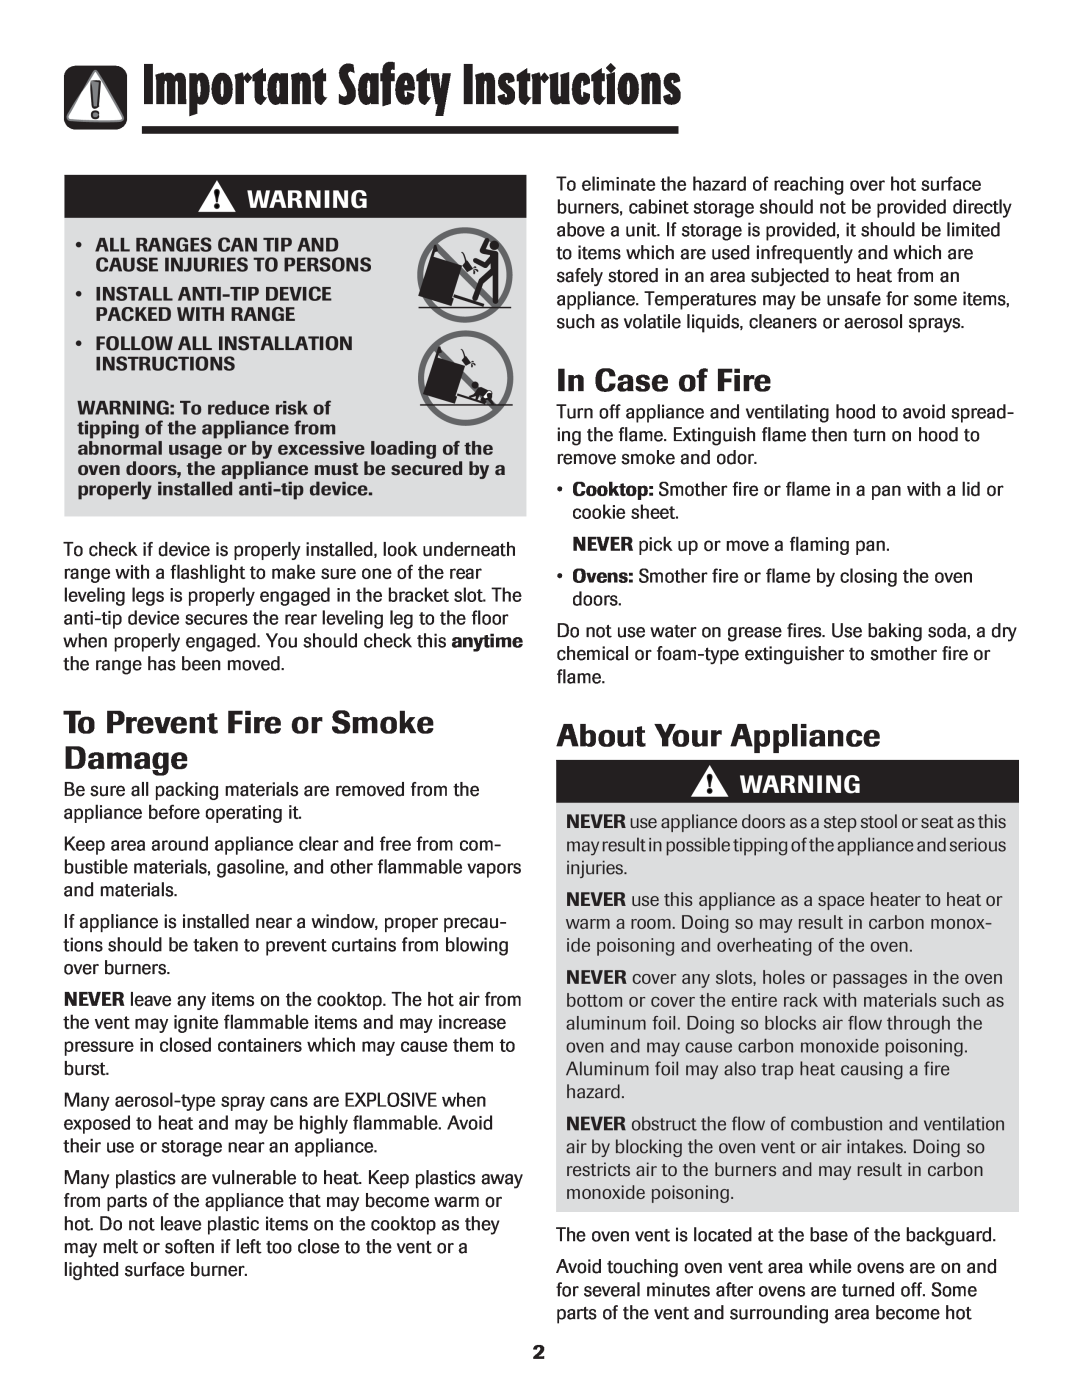 Maytag 850 Important Safety Instructions, In Case of Fire, To Prevent Fire or Smoke Damage, About Your Appliance 